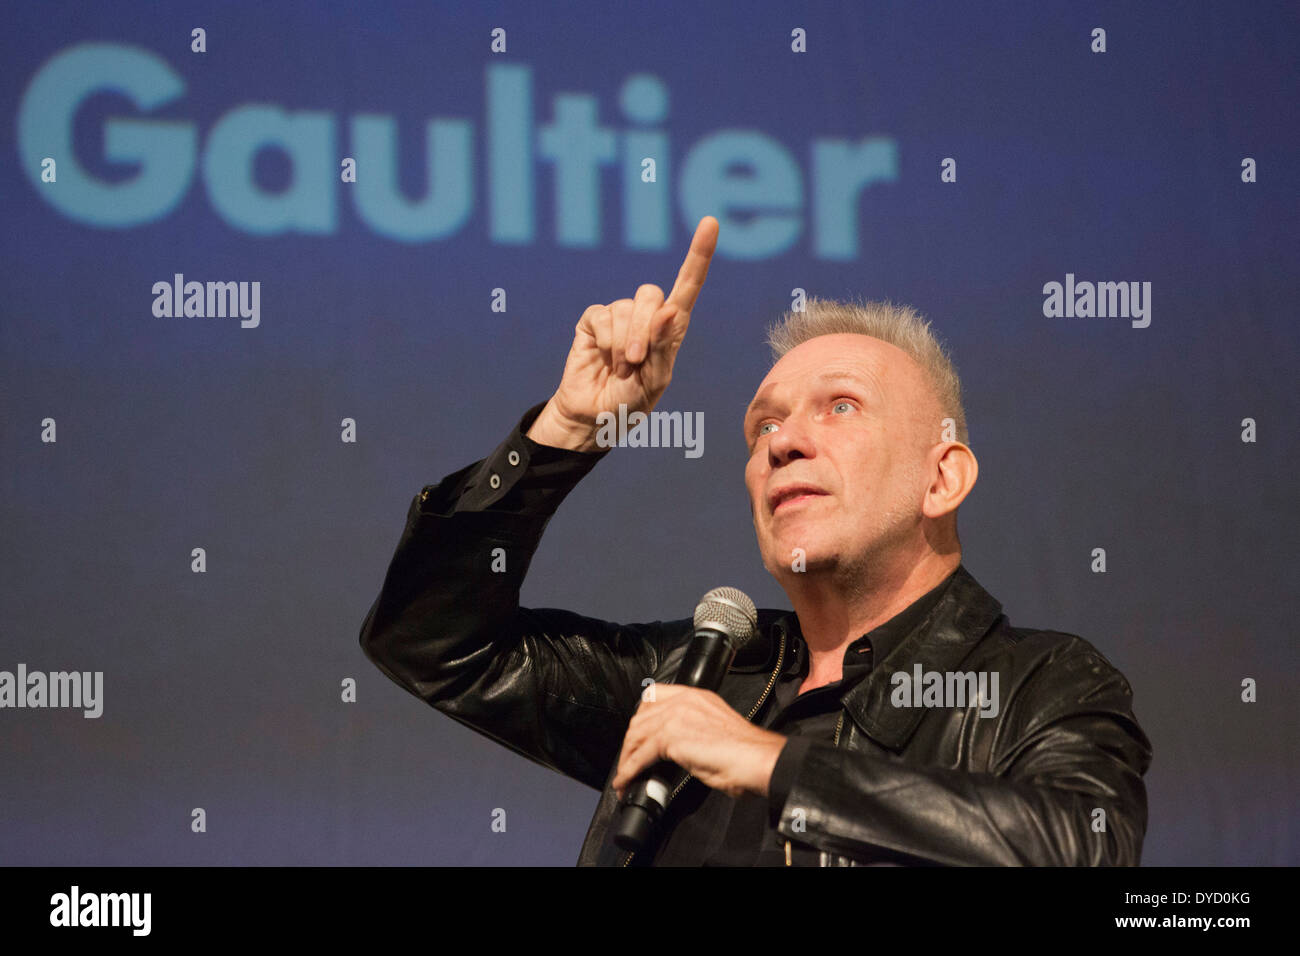 Jean Paul Gaultier opens his exhibition 'The Fashion World of Jean Paul Gaultier - From the Sidewalk to the Catwalk', London Stock Photo